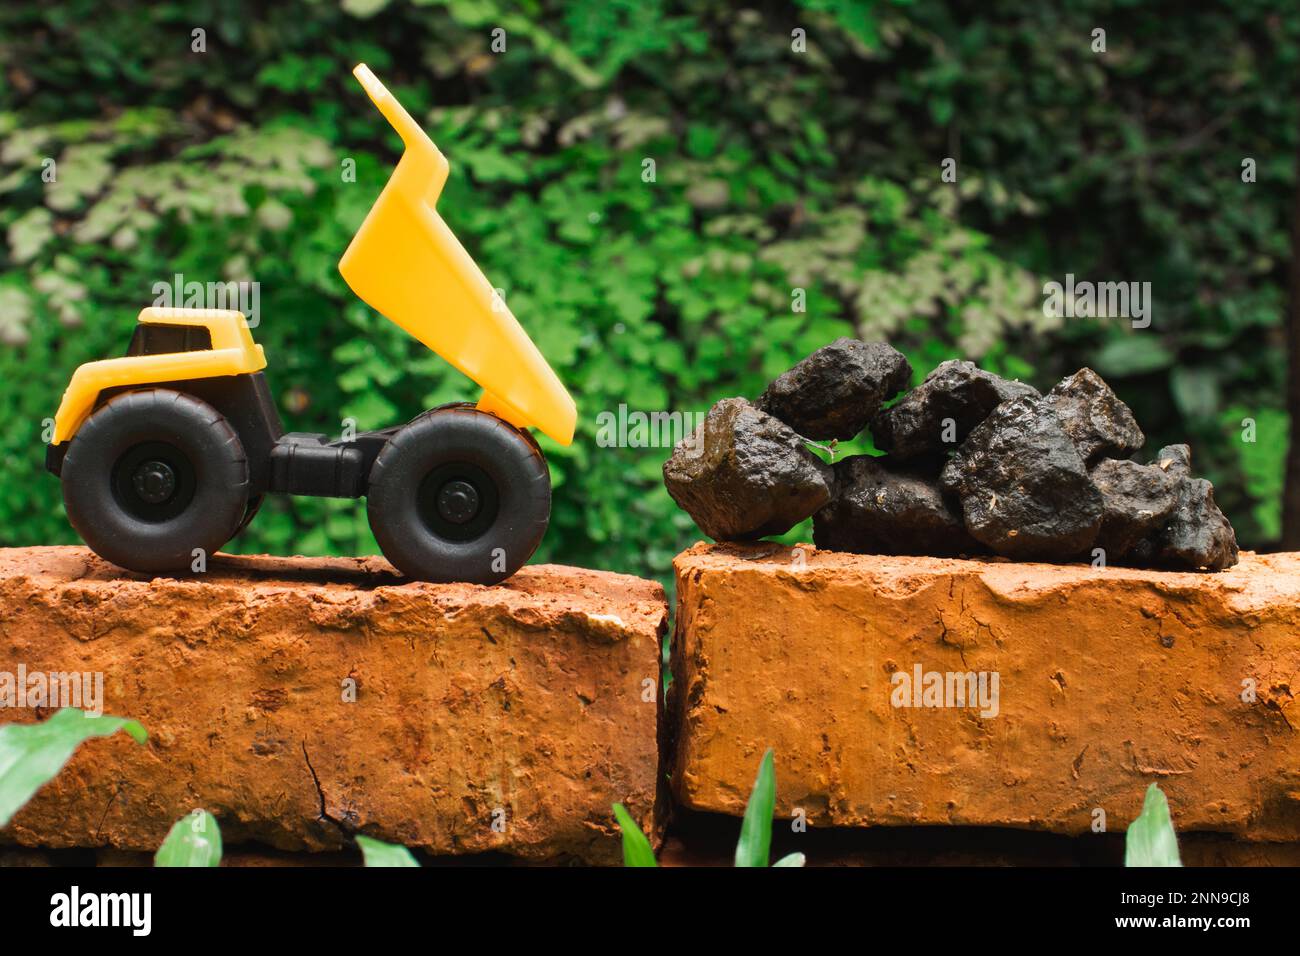 A photo of yellow toy dump truck try to carry pile of stones on a brick, after edited. Stock Photo